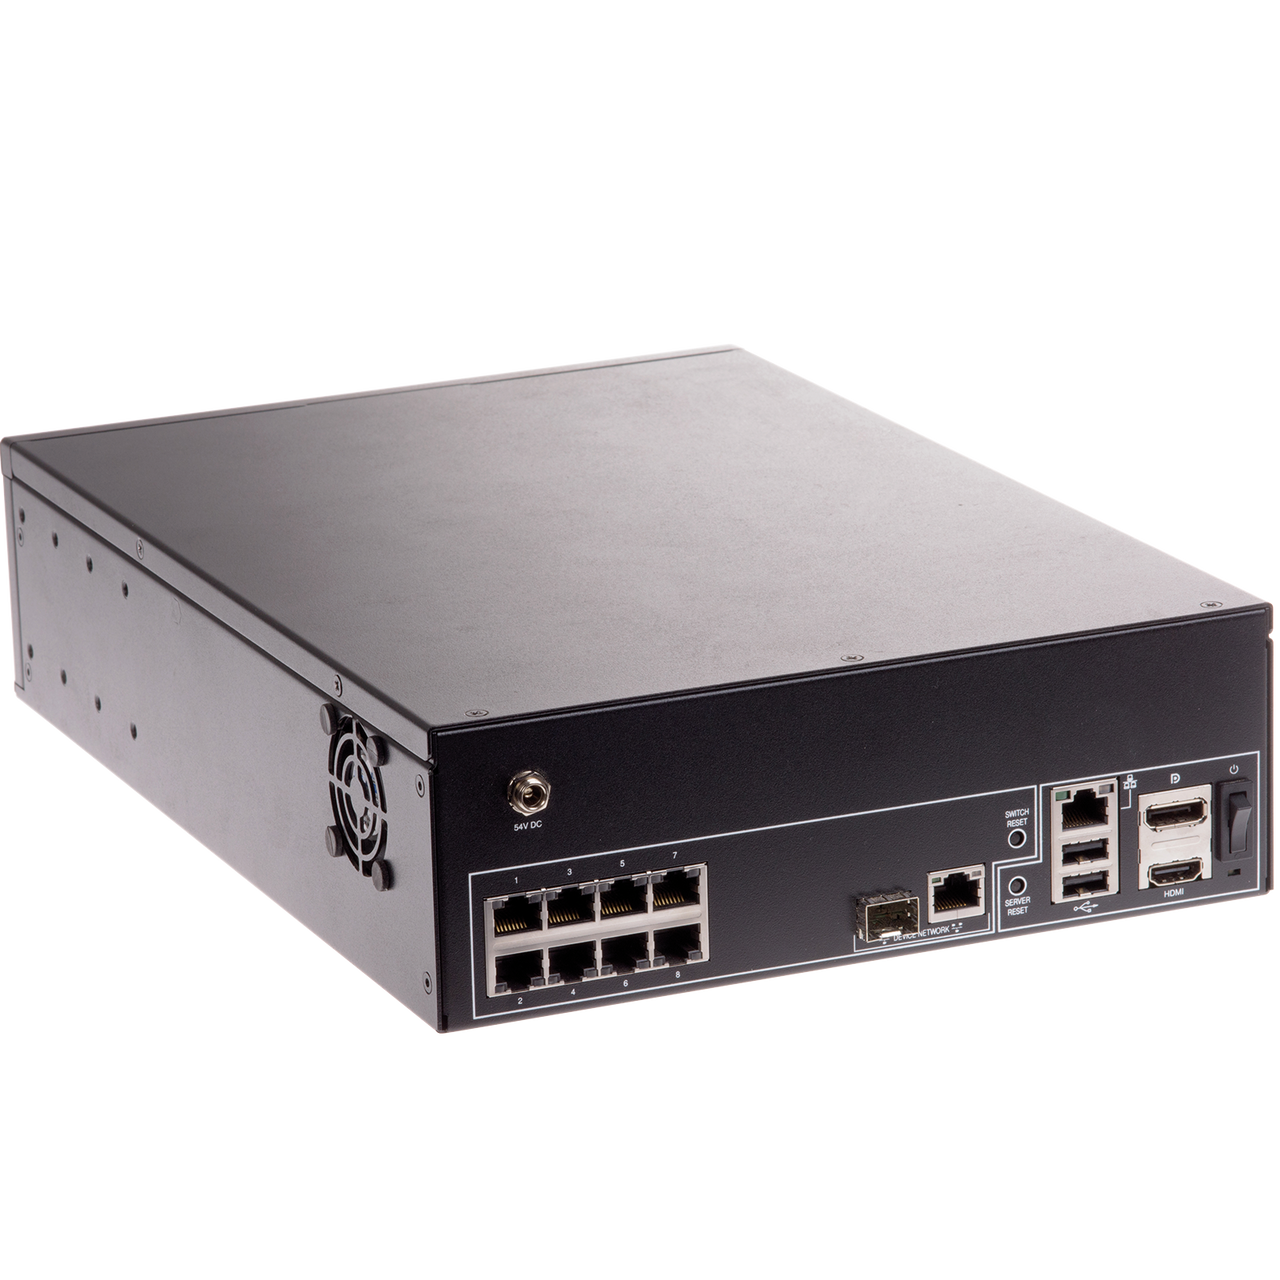 AXIS S2208 All-in-one recorder with integrated 8 channel PoE switch for high-definition surveillance